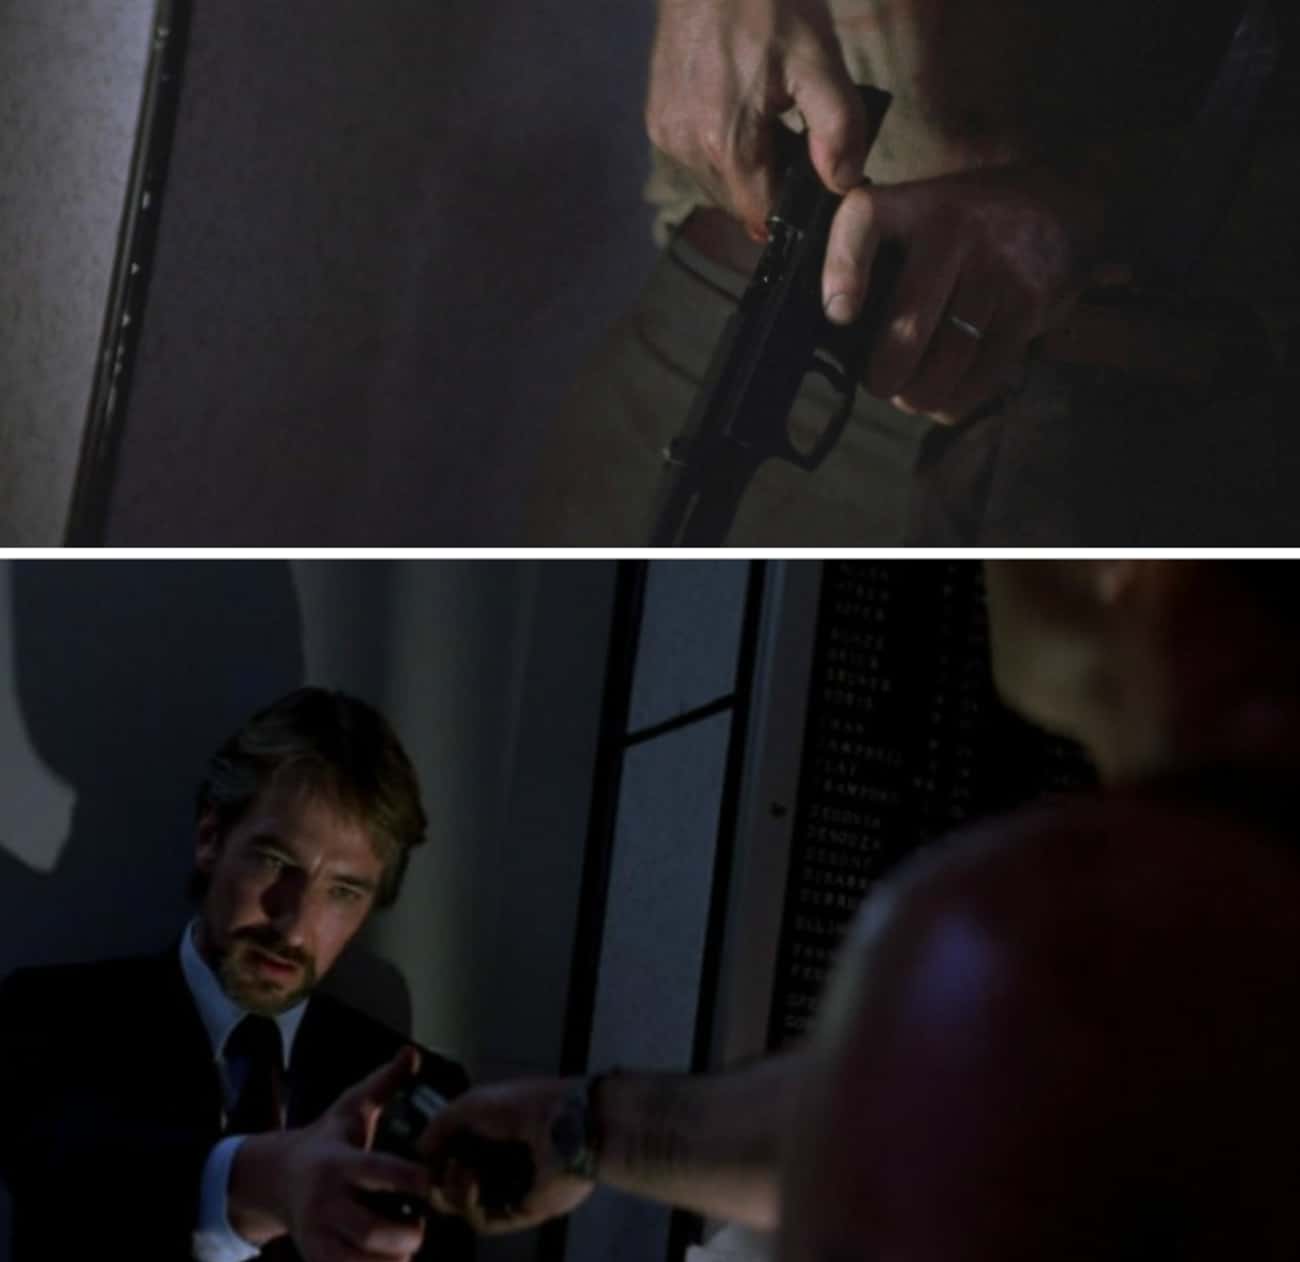 McClane Can Be Seen Holding Down The Slide Release On His Gun Before Handing It To Hans In 'Die Hard'